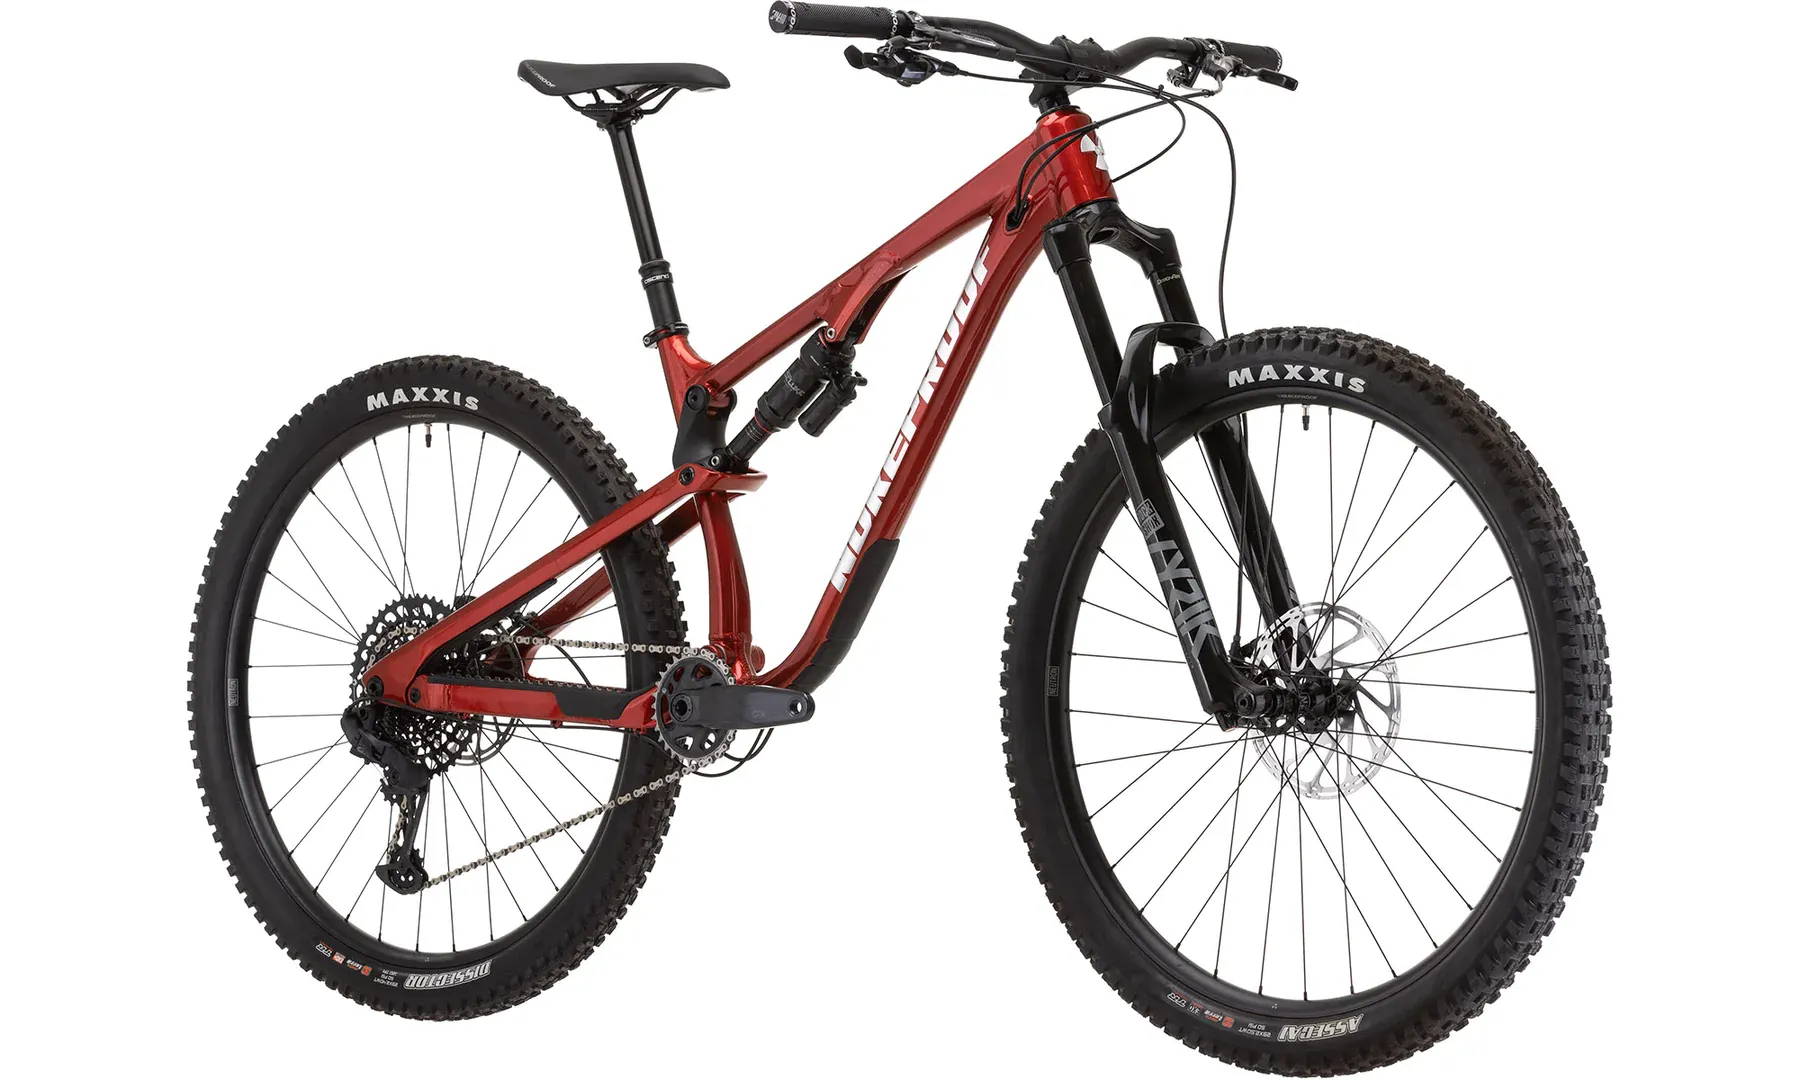 Side view of the Nukeproof Reactor Alloy mountain bike.